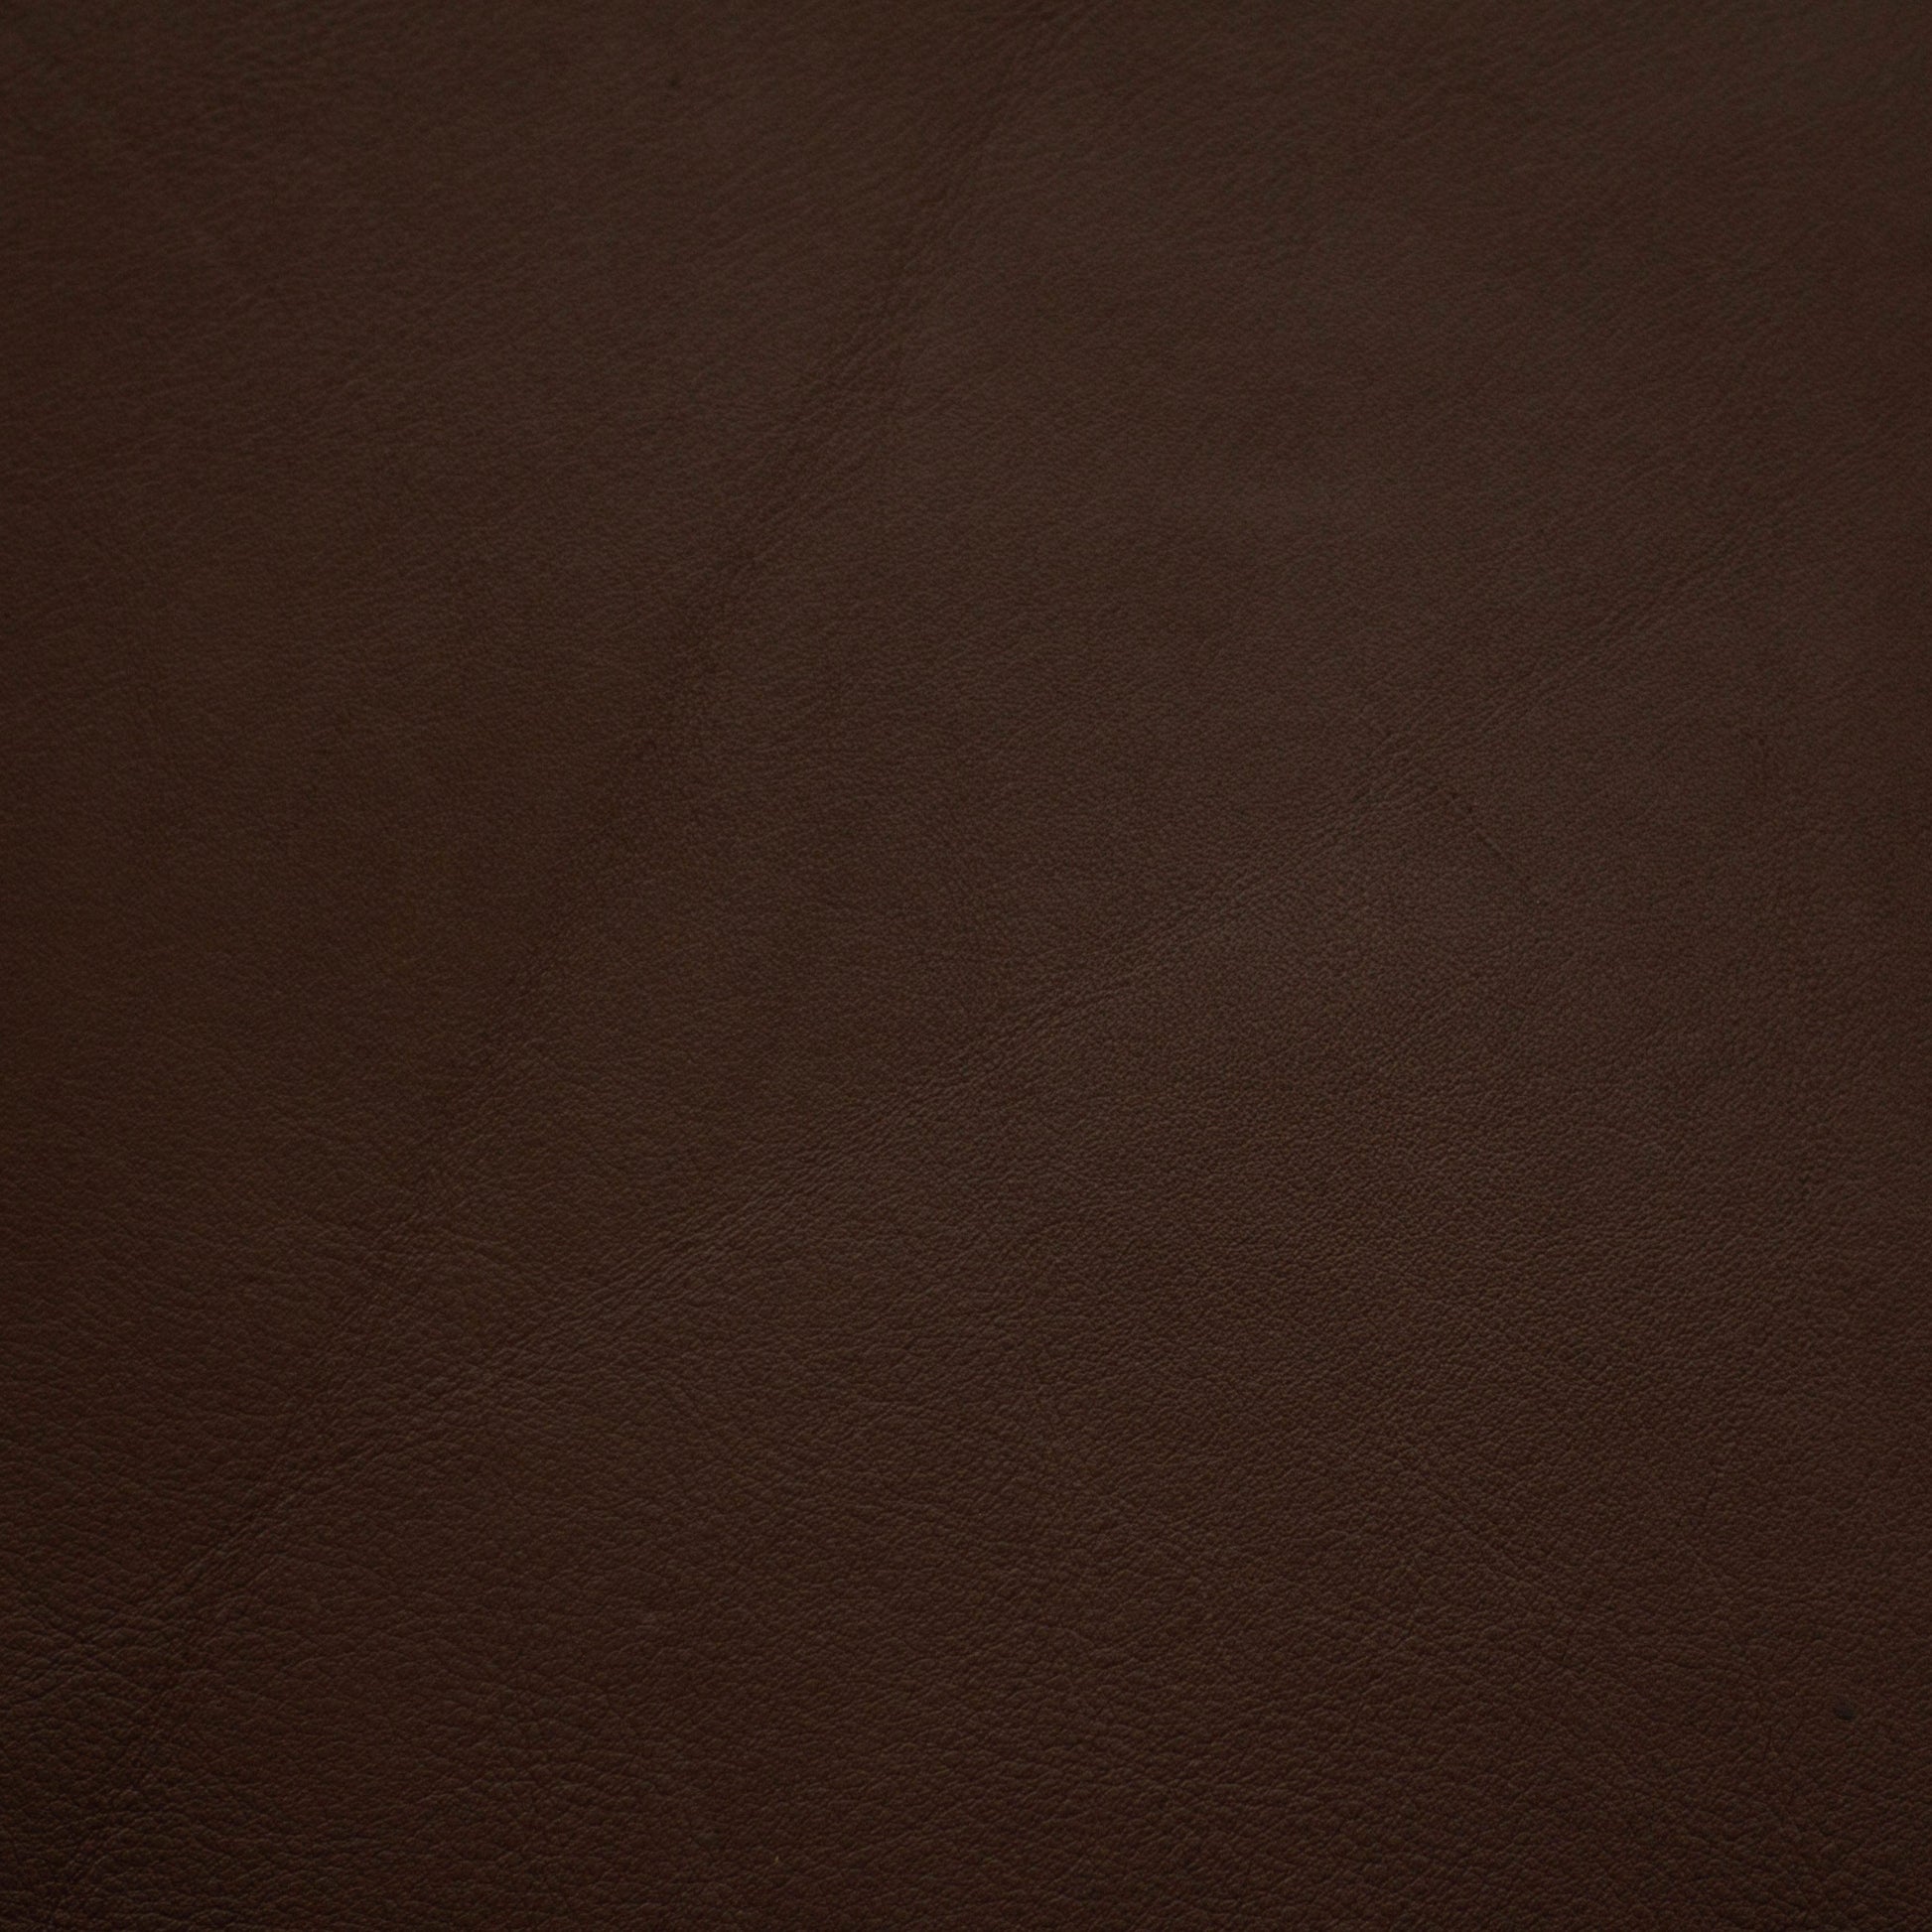 Renaissance, Smudge, Iconic® Antimicrobial & Cleanable, Hospitality Leather Hide